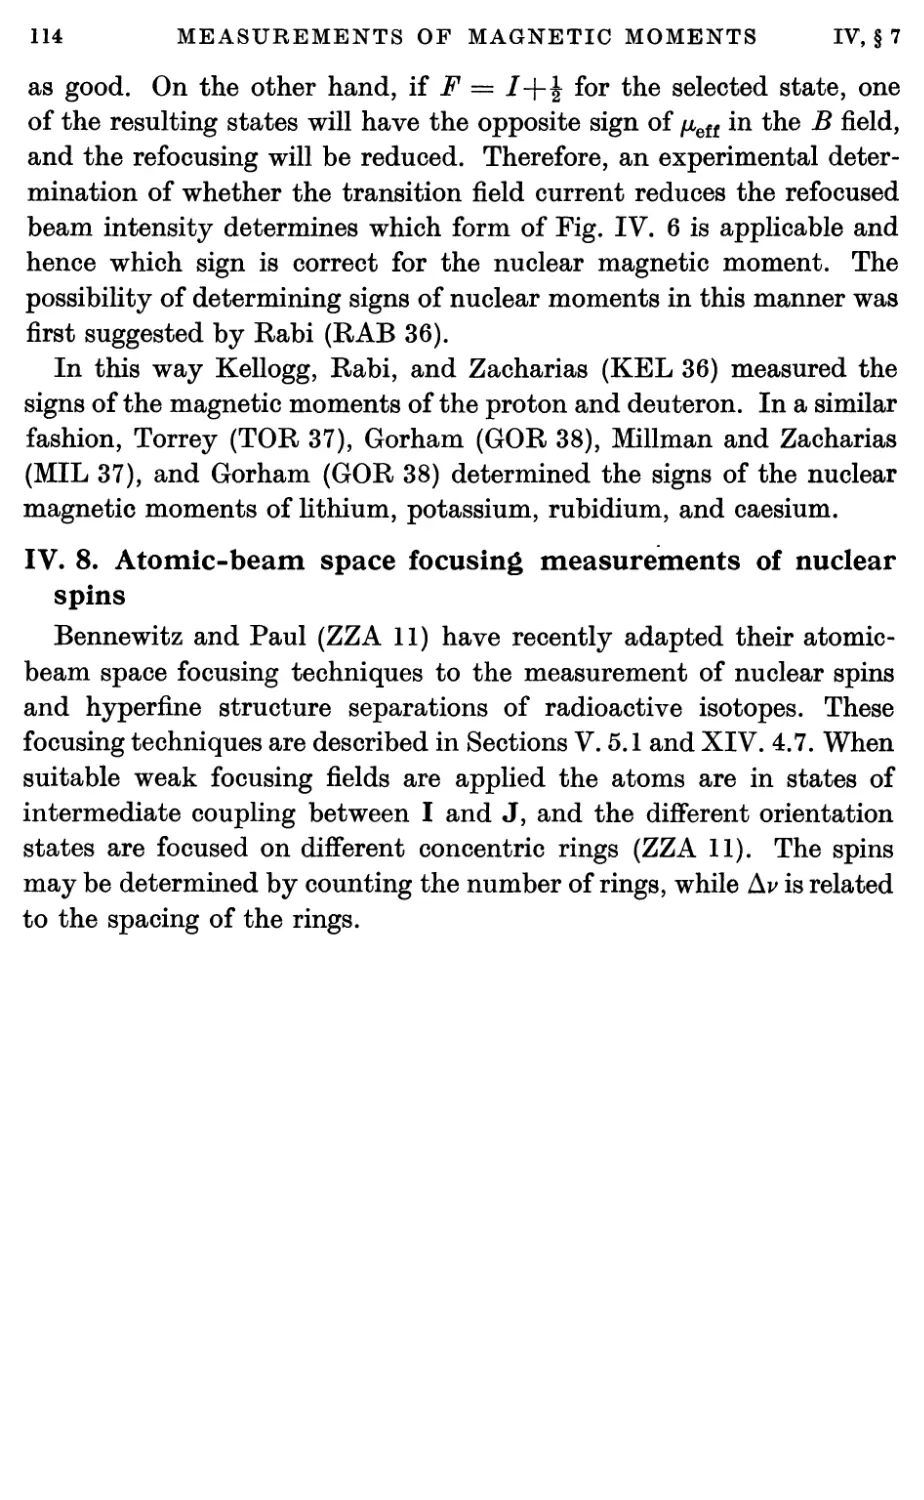 IV.8. Atomic-beam Space Focusing Measurements of Nuclear Spins